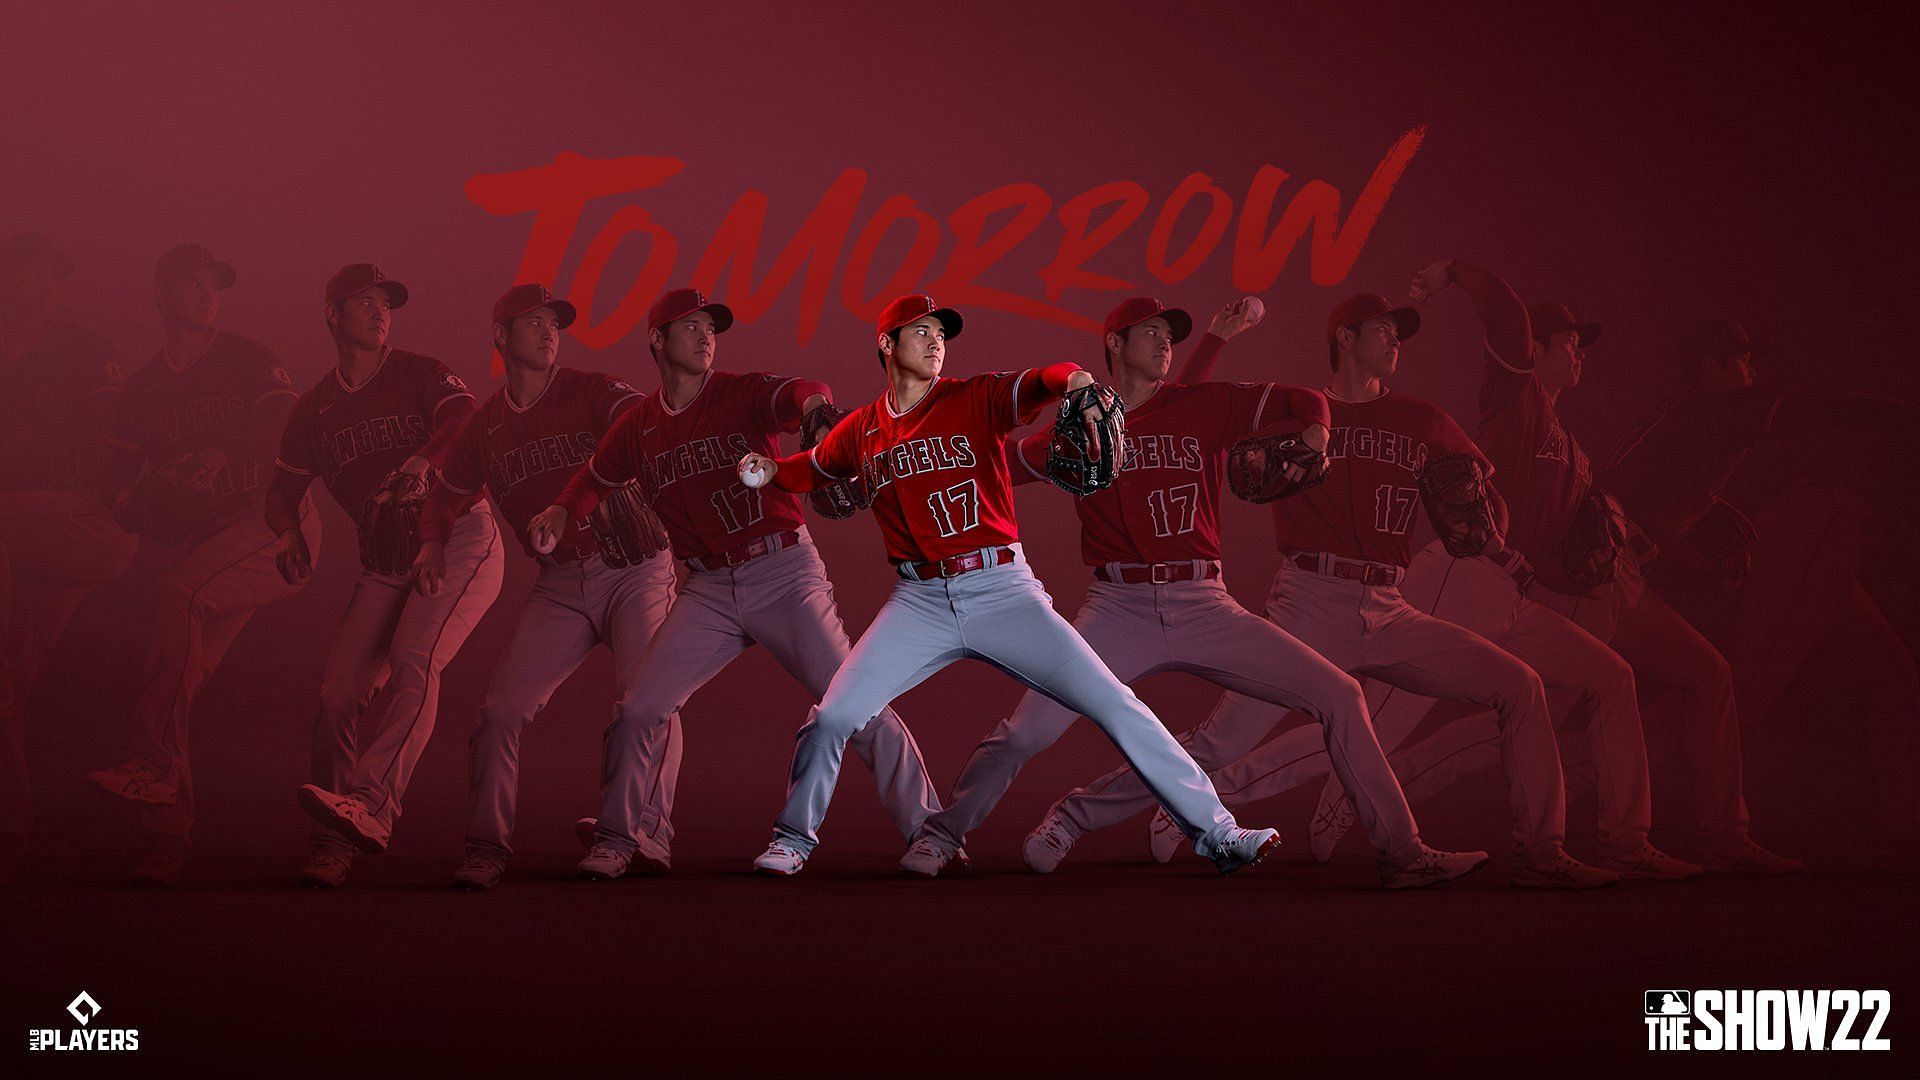 Shohei Ohtani, the cover athlete of MLB The Show 22 (Photo via MLB The Show Twitter page)